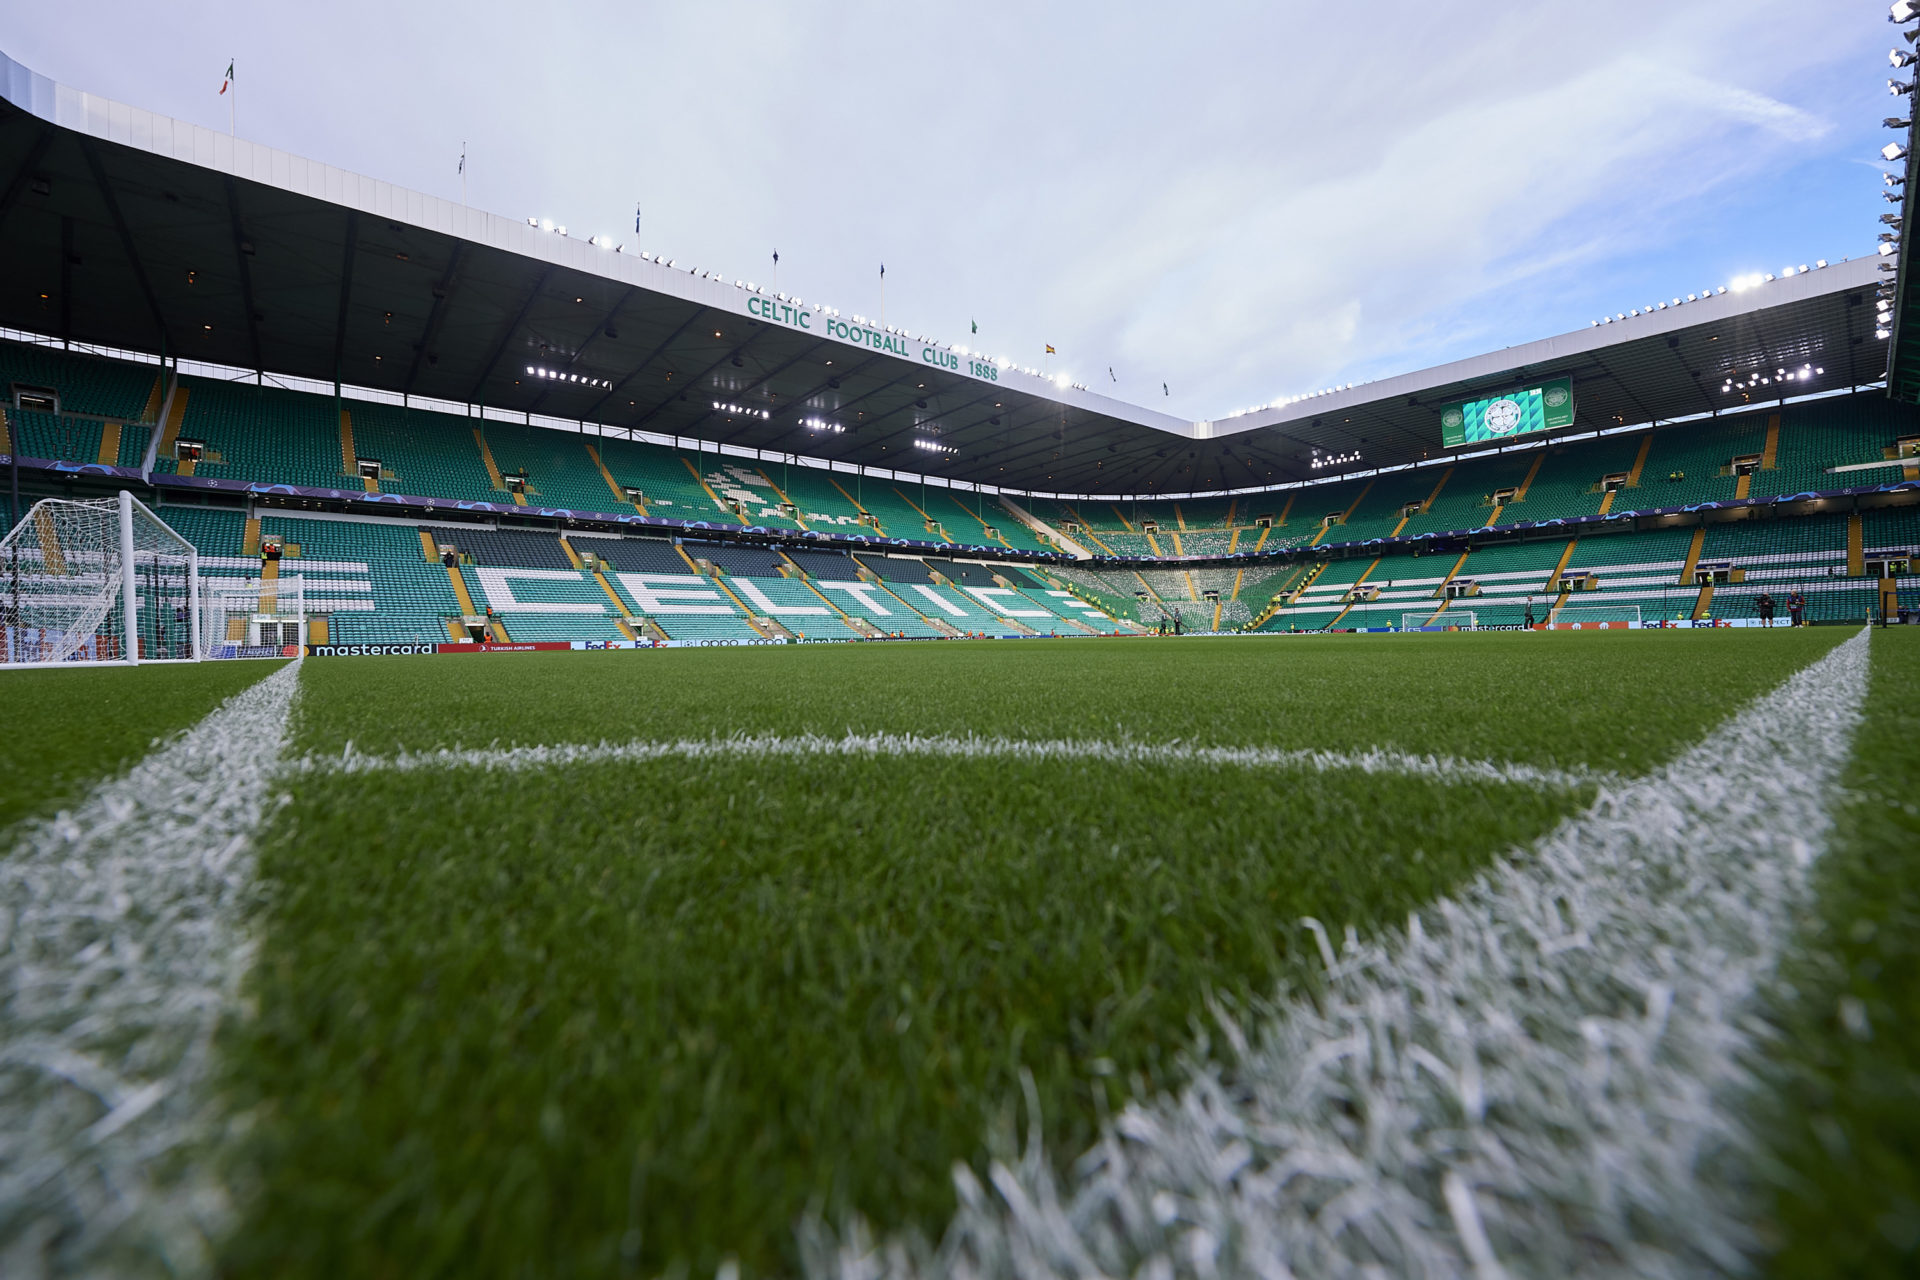 A view of Celtic Park / (Photo by Silvestre Szpylma/Quality Sport Images/Getty Images)